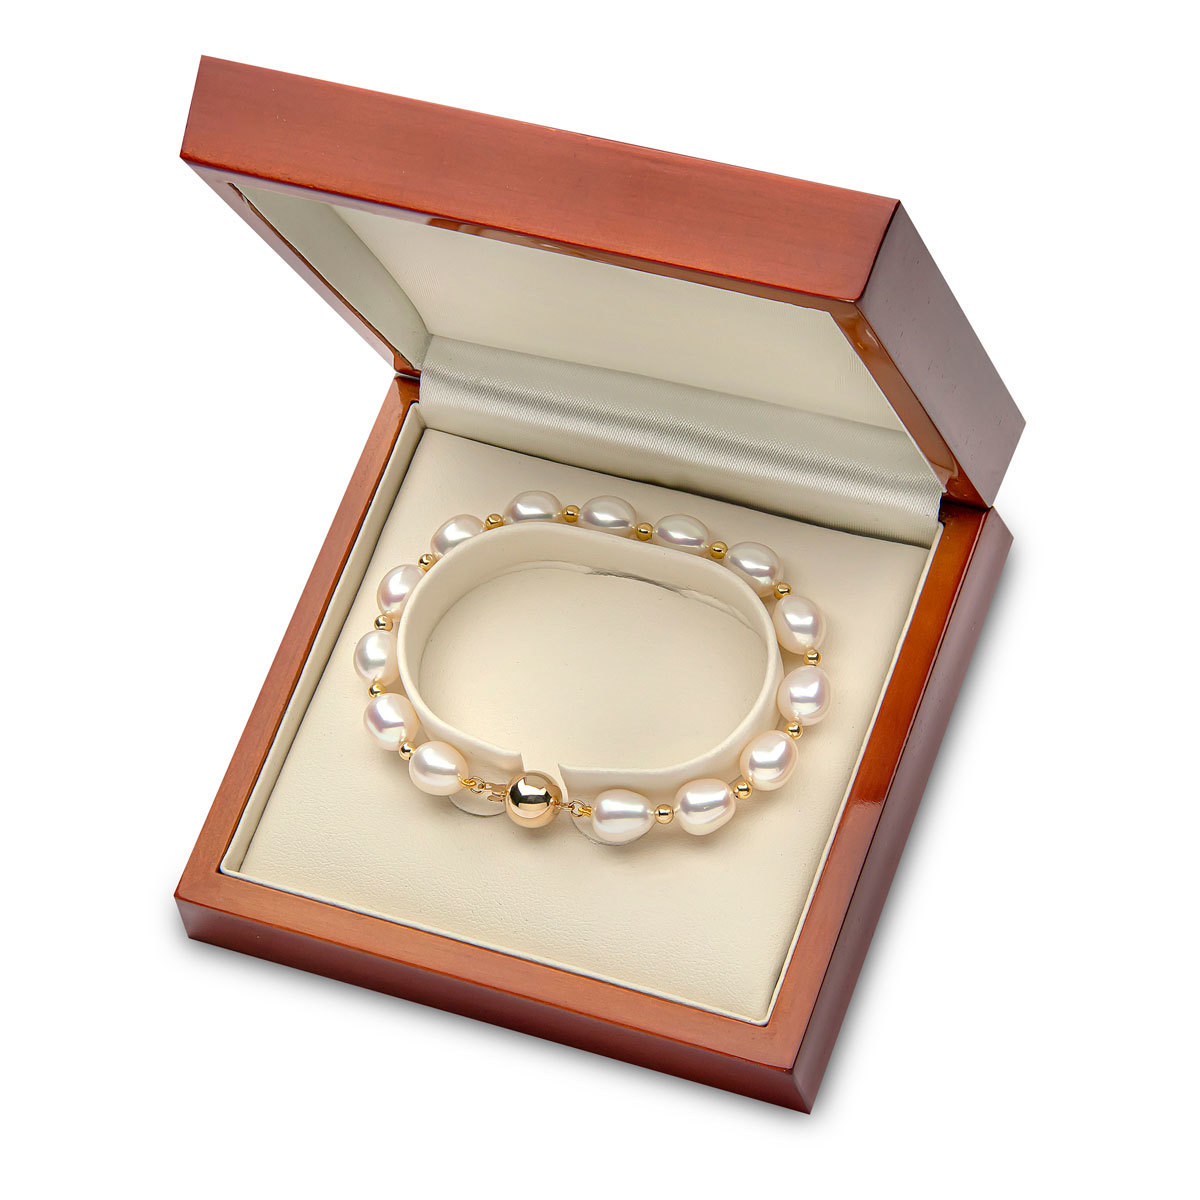 8-8.5mm Cultured Freshwater White Oval Pearl and Gold Bead Bracelet, 18ct Yellow Gold